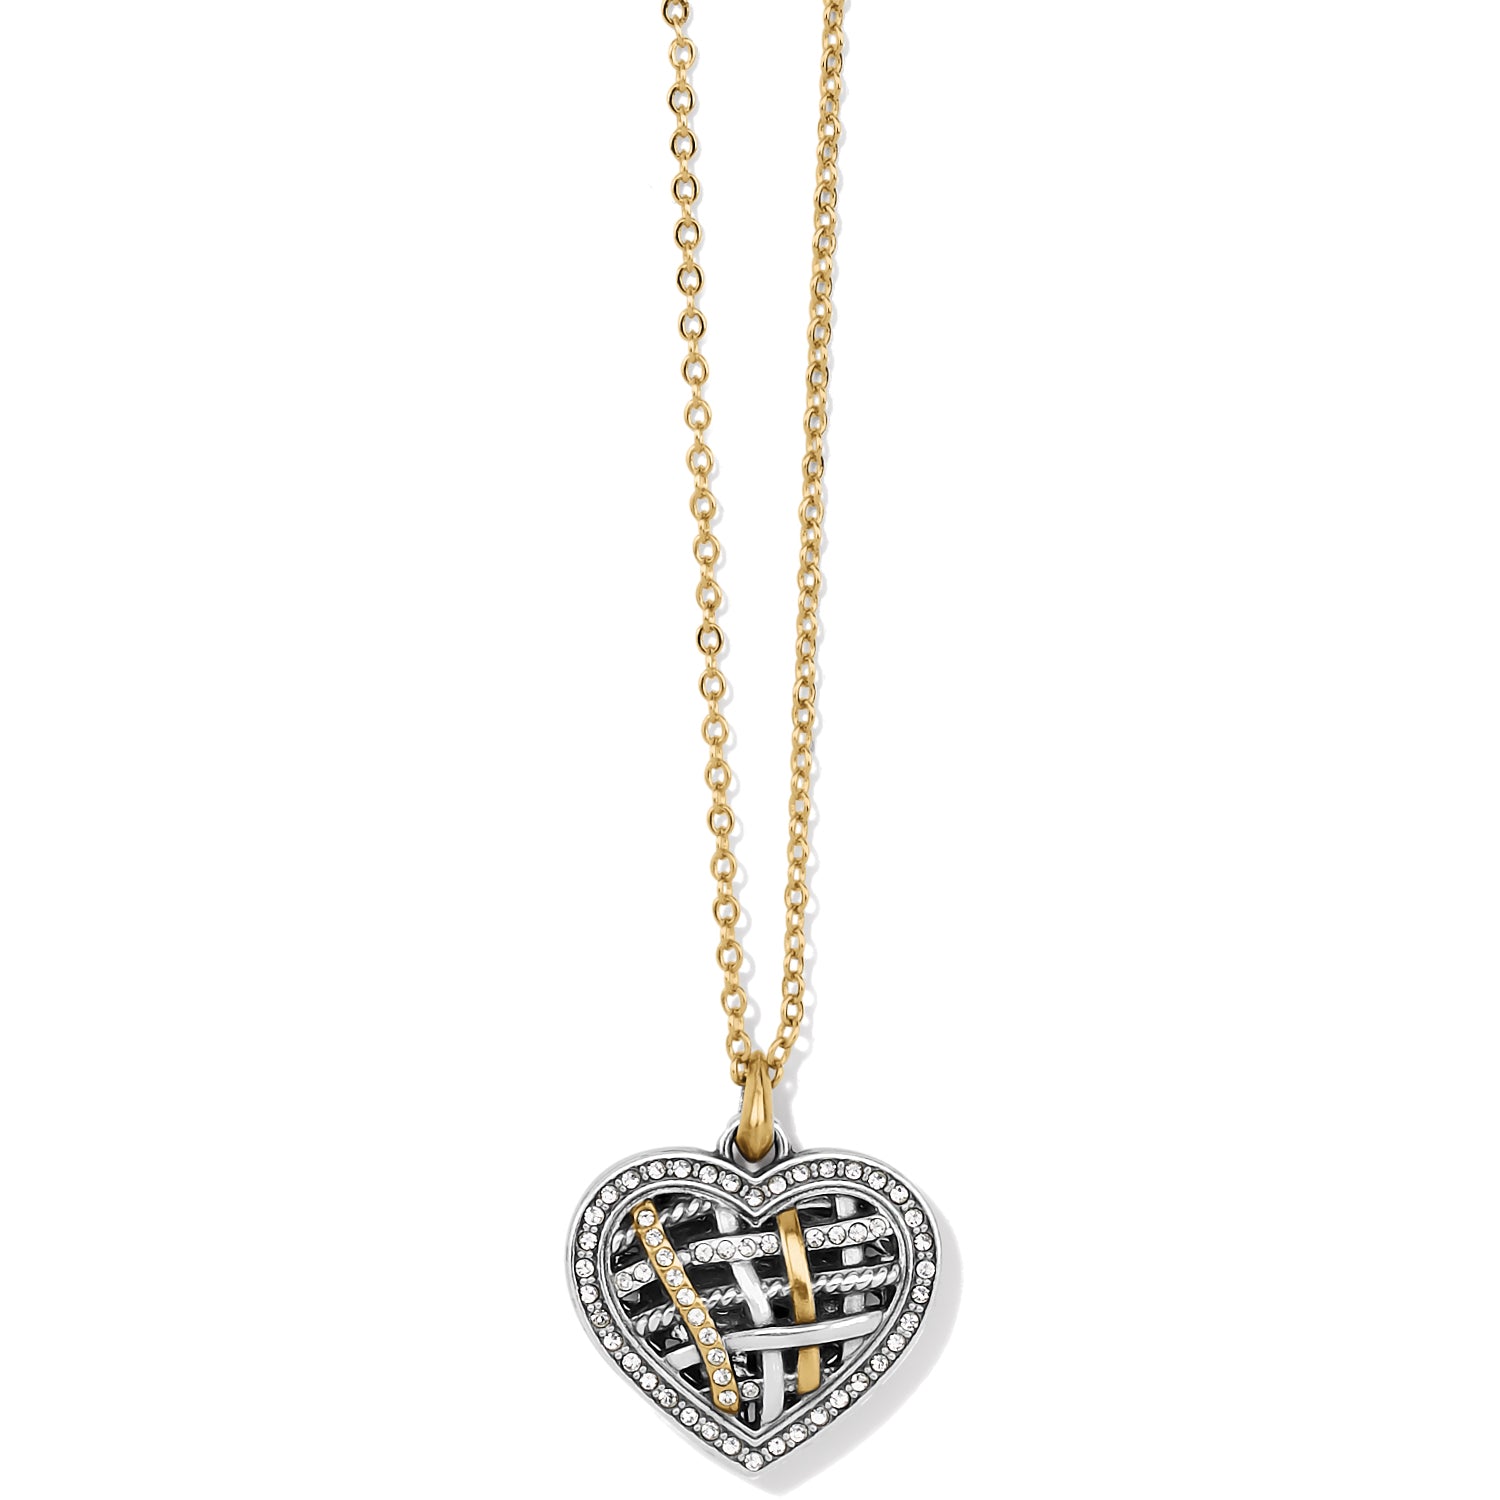 Neptune's Rings Woven Petite Heart Necklace